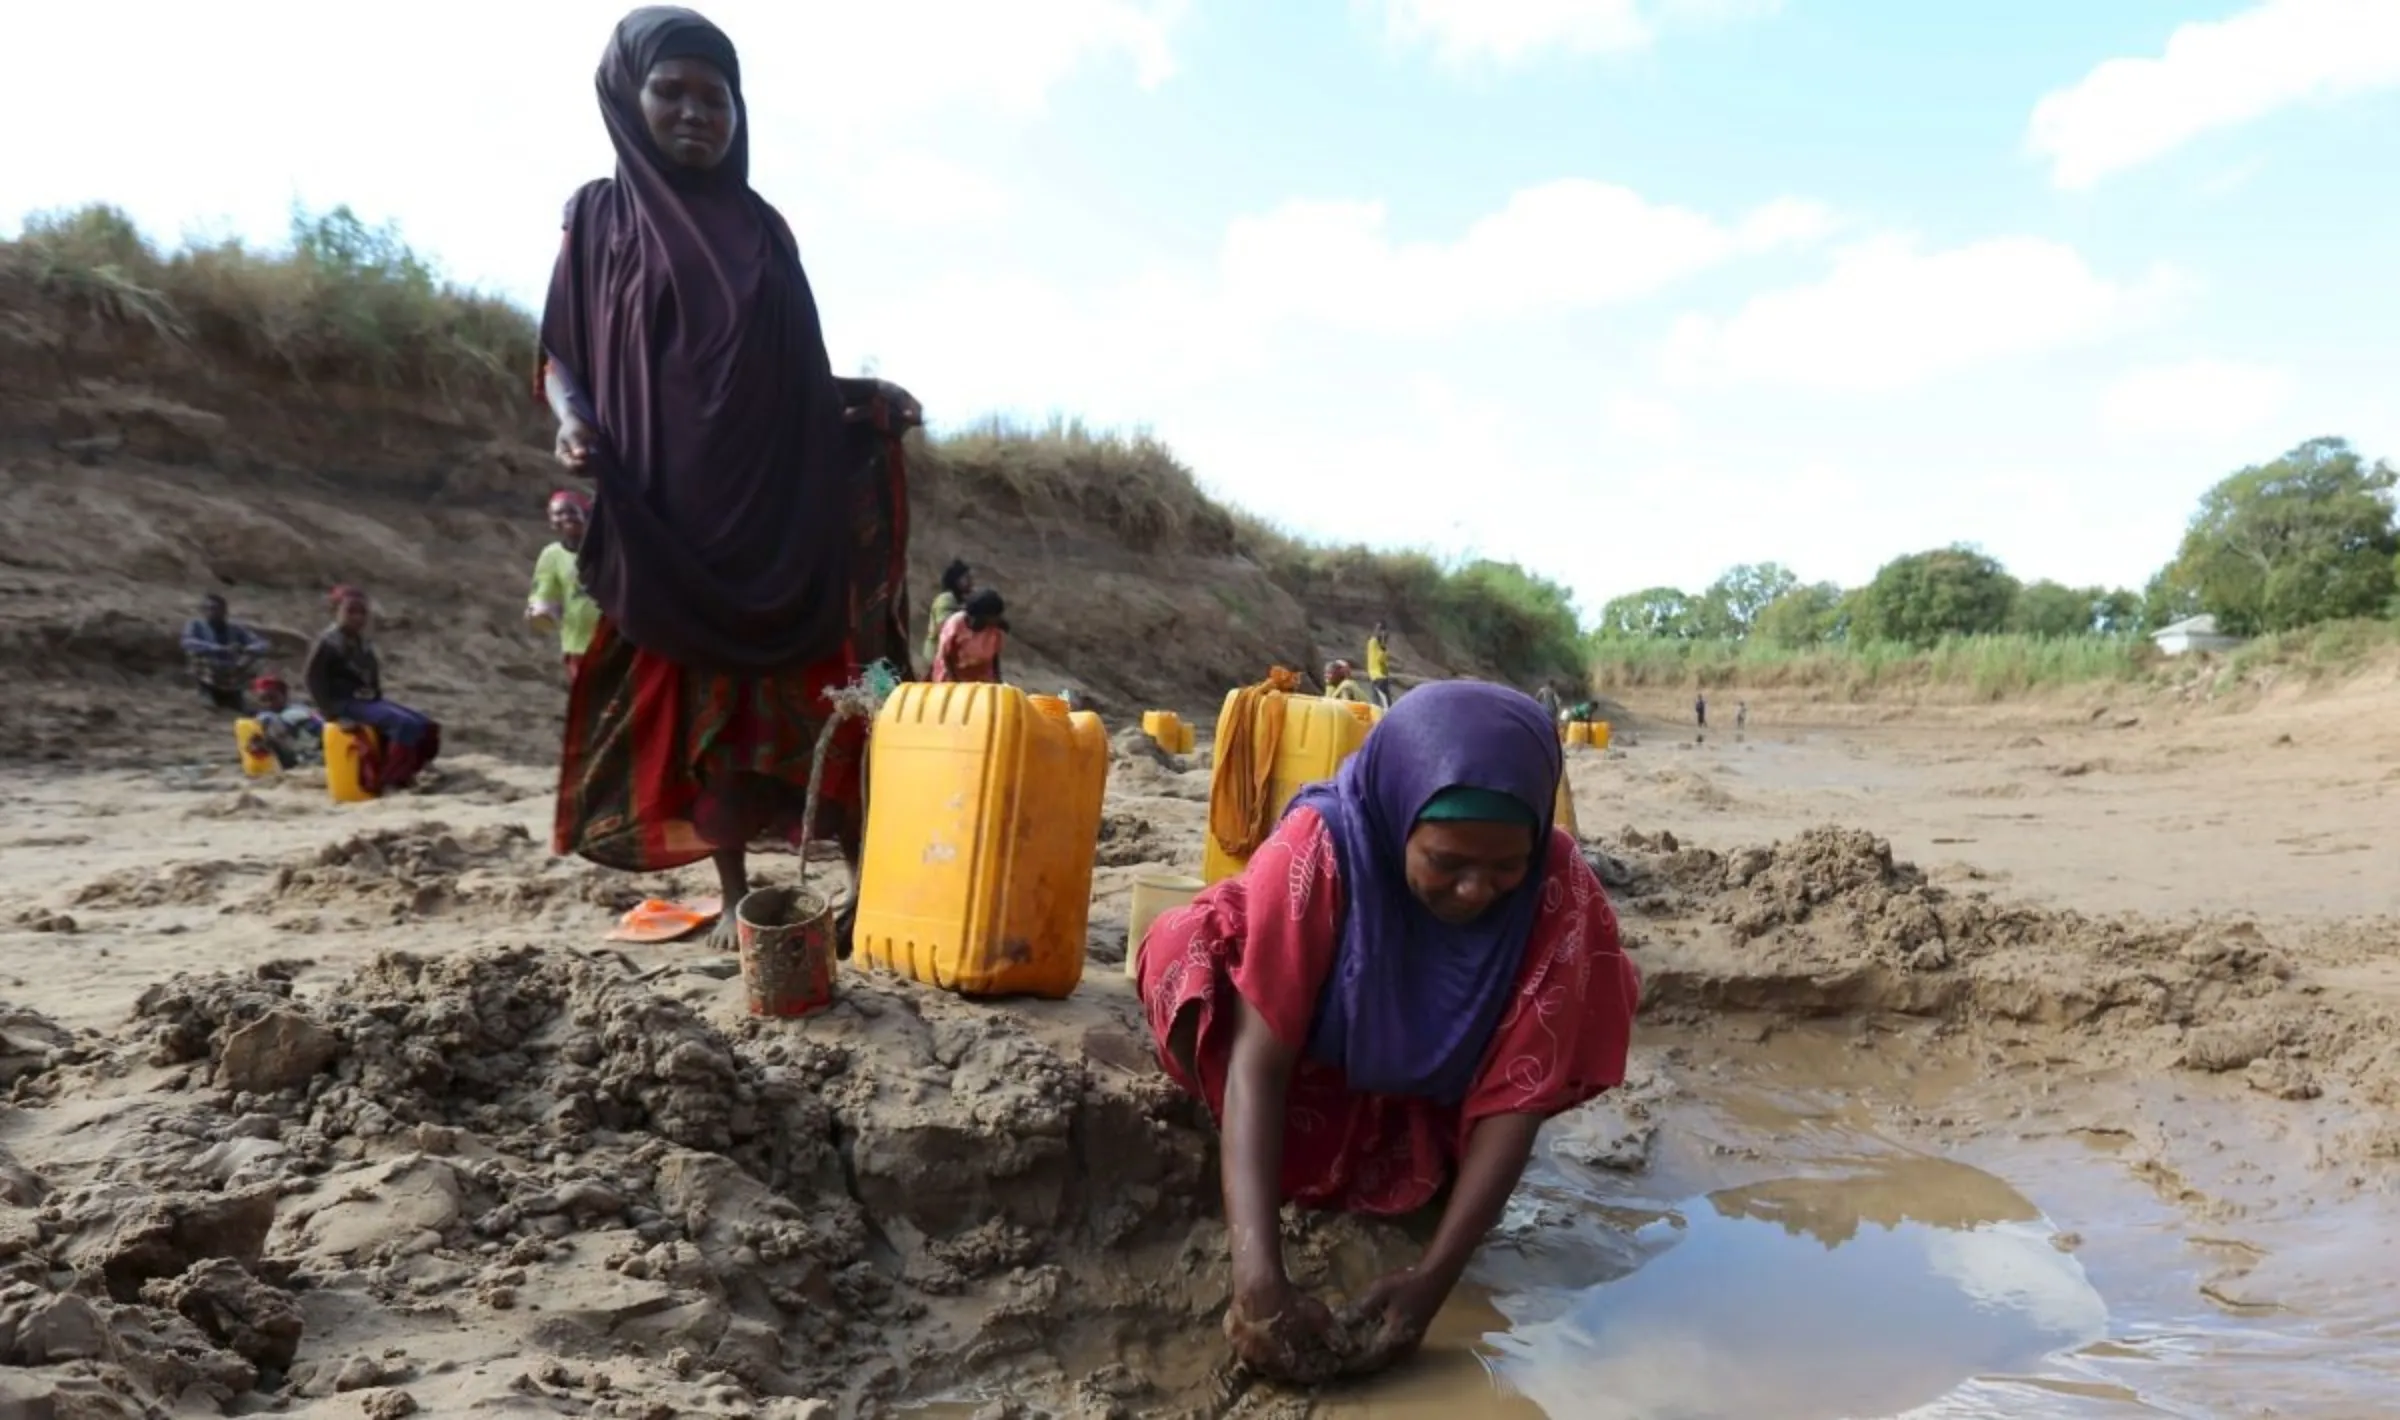 People collect water from shallow wells dug along the Shabelle River bed, which is dry due to drought in Somalia's Shabelle region, March 19, 2016